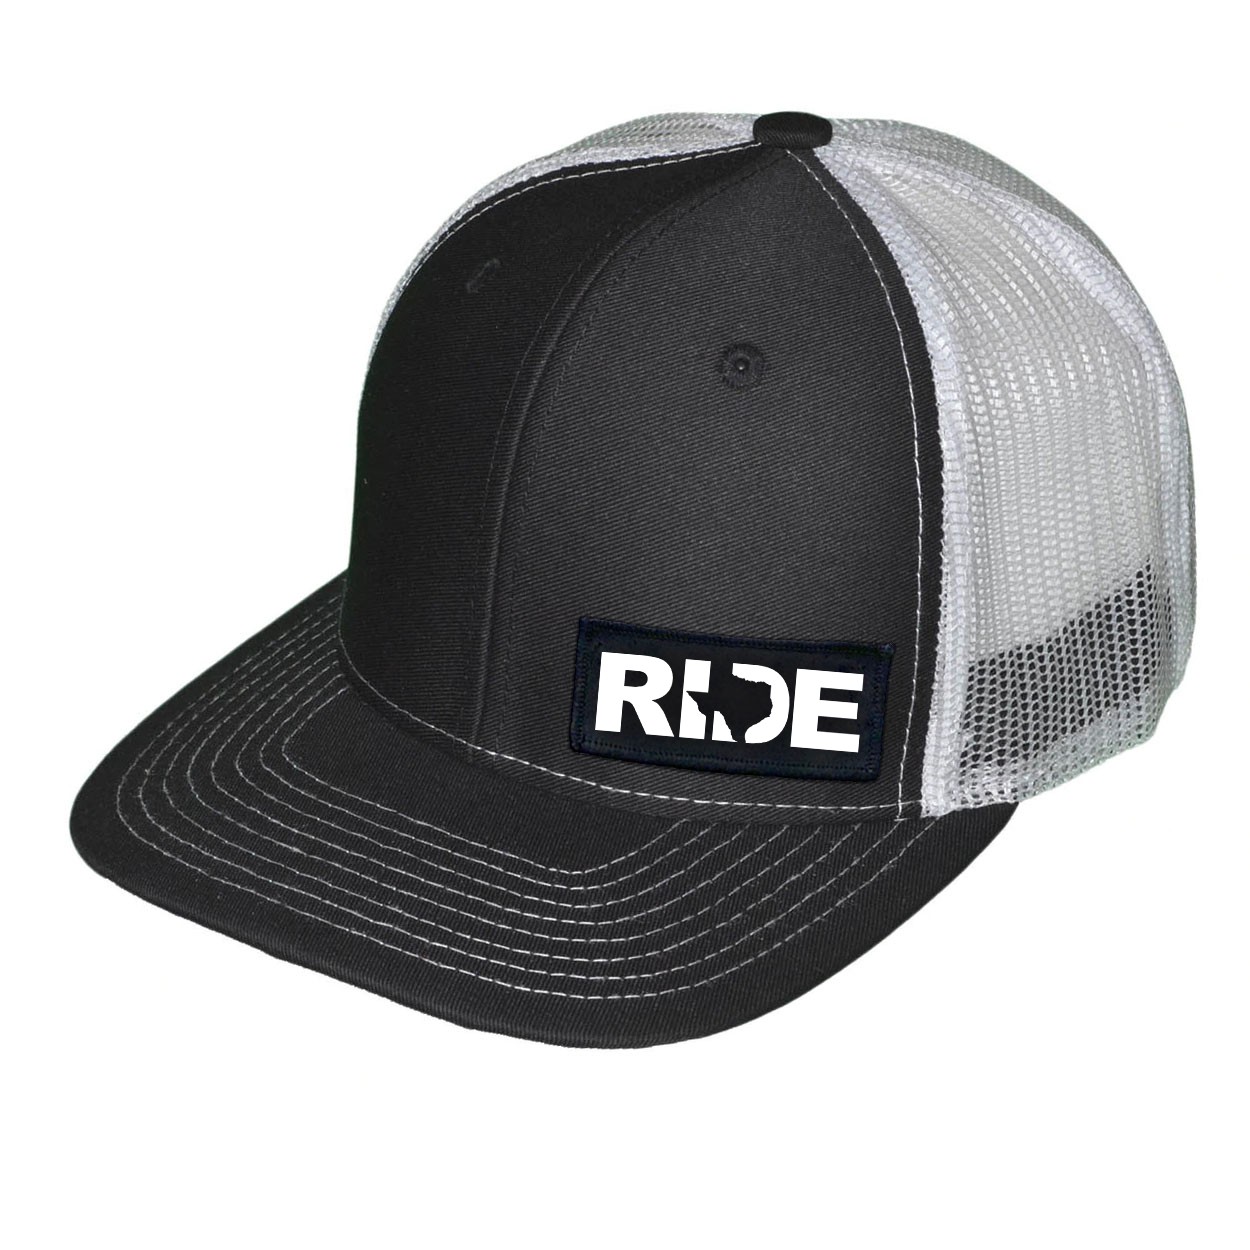 Ride Texas Night Out Woven Patch Snapback Trucker Hat Black/White (White Logo)